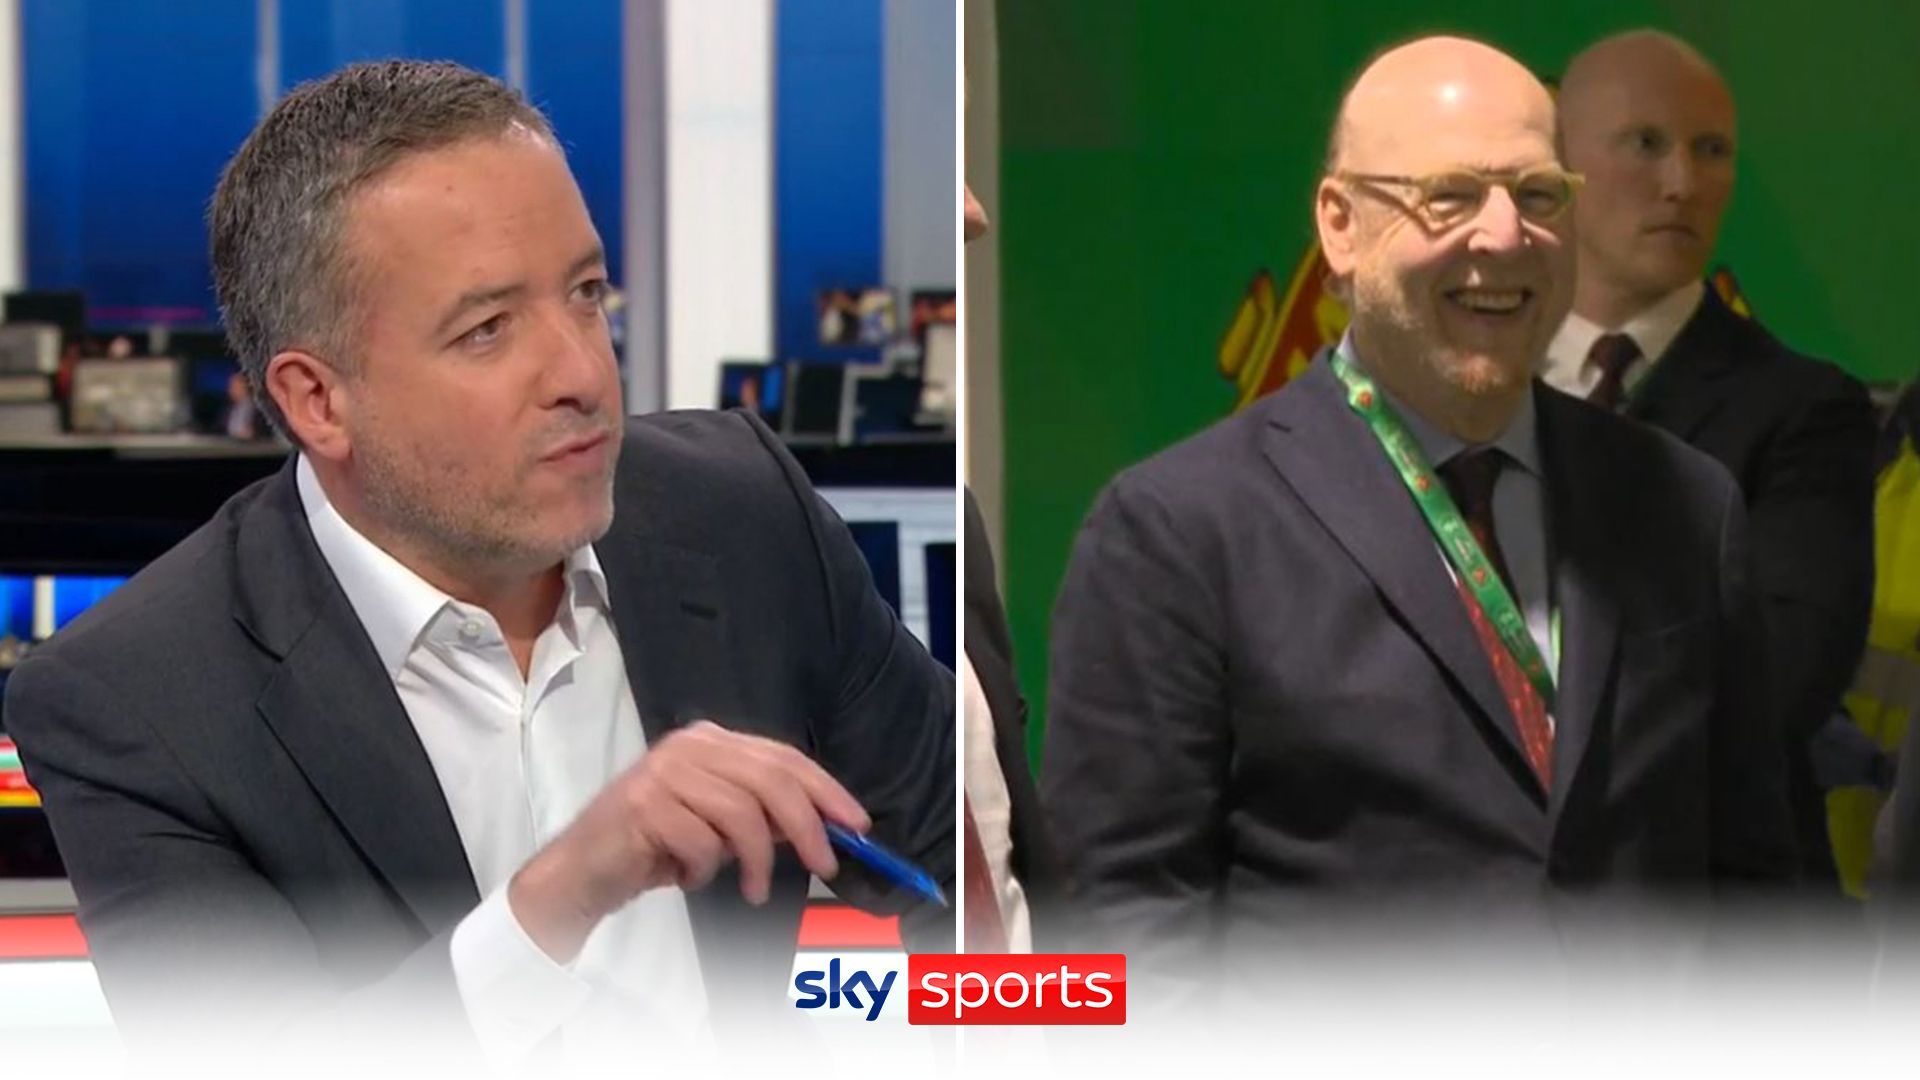 Are Glazers looking to keep hold of Man Utd? | 'They may just sell small stake' 